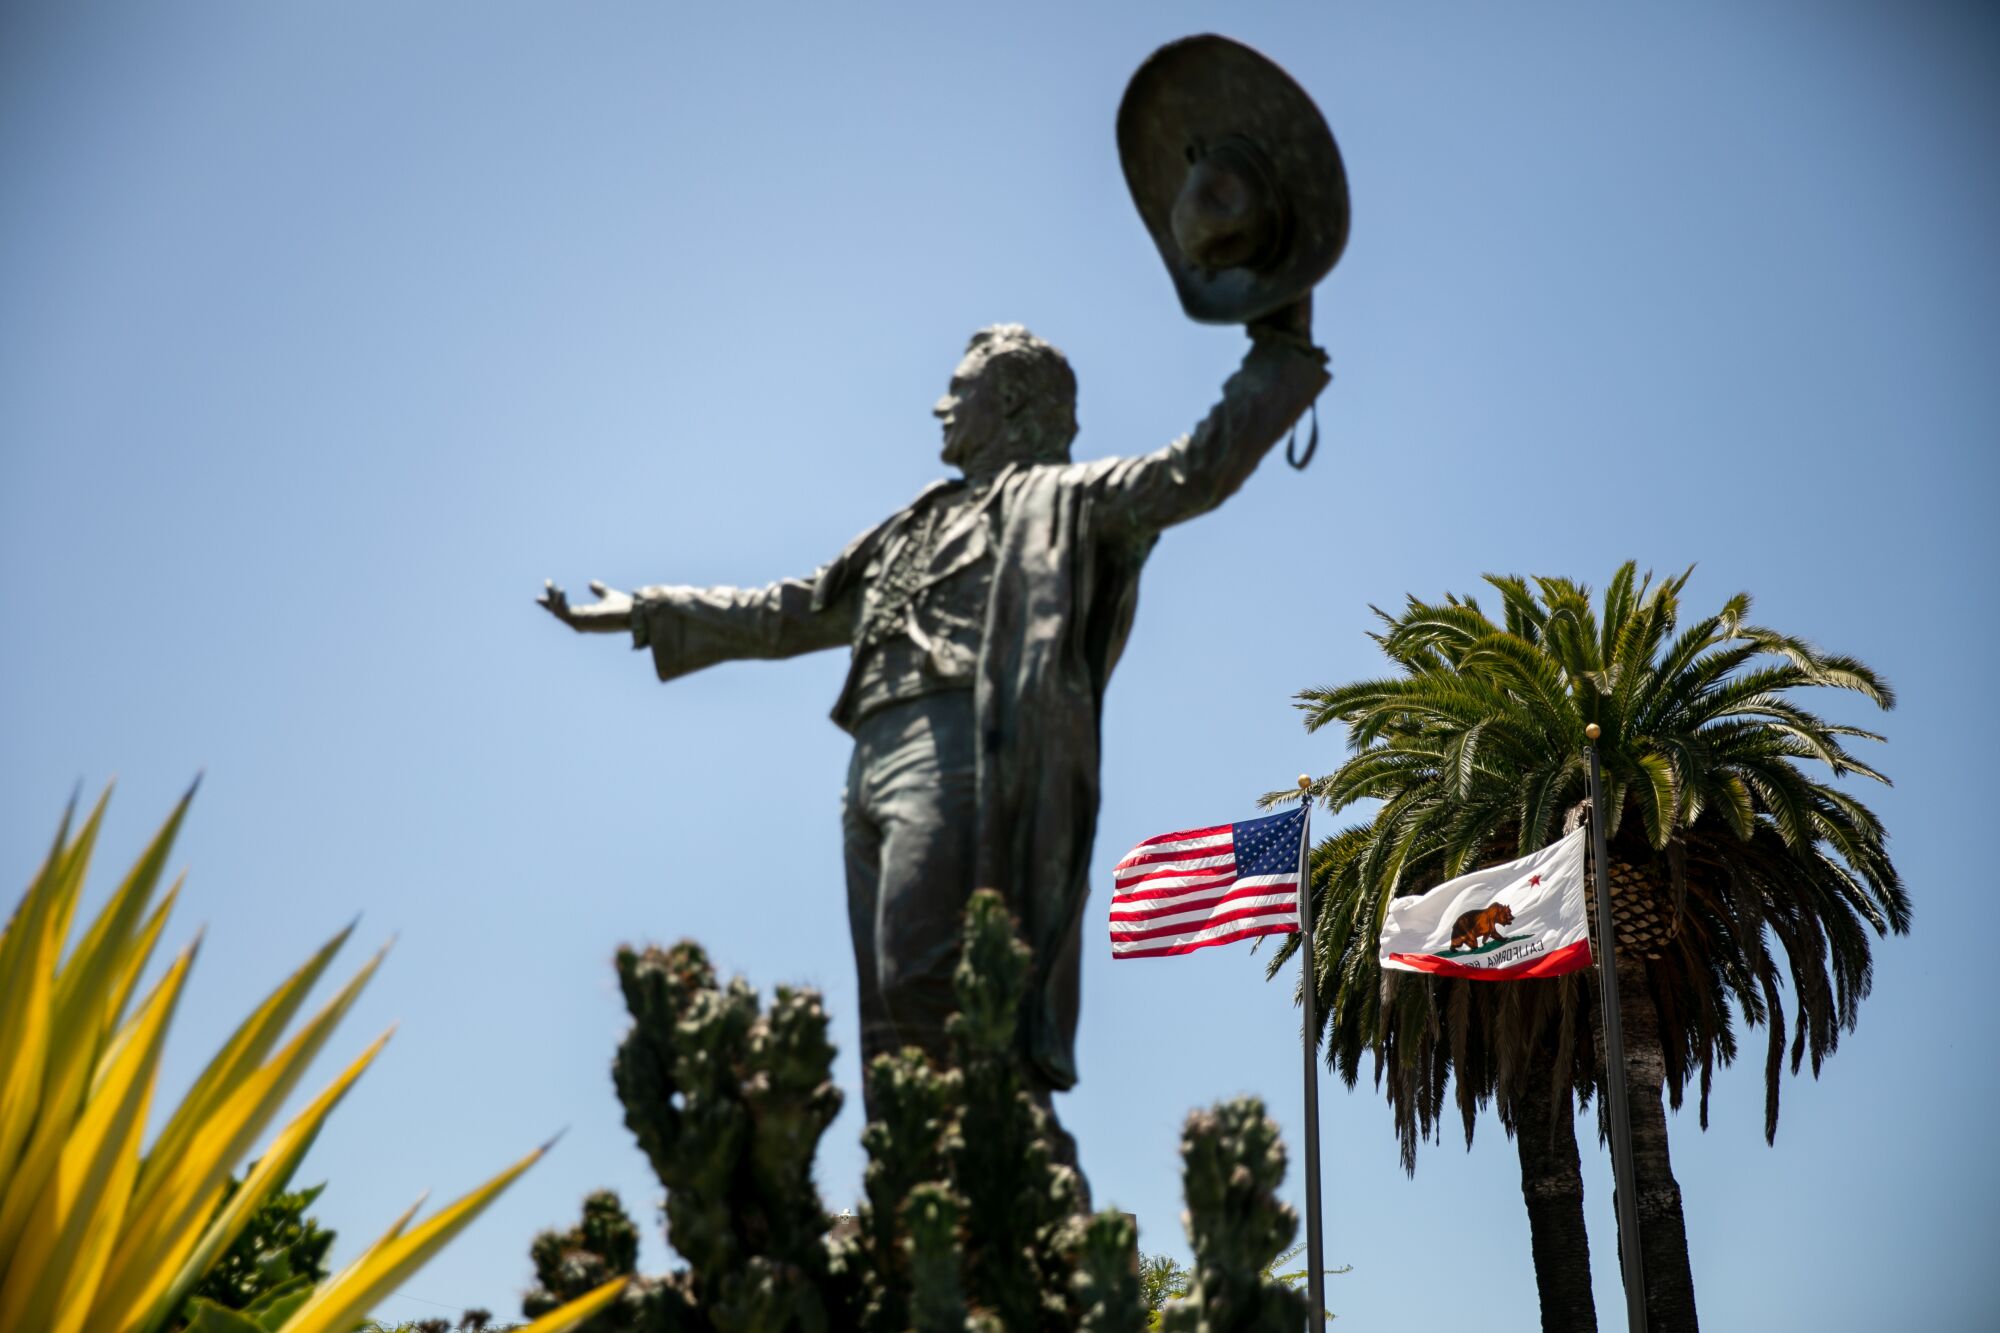 A statue of Don Diego, the late fair ambassador, stands at the gate to the Del Mar Fairgrounds on Wednesday. Fairgrounds officials are asking people to support a request for $20 million in federal aid to help them weather the financial blow they've taken during the pandemic.